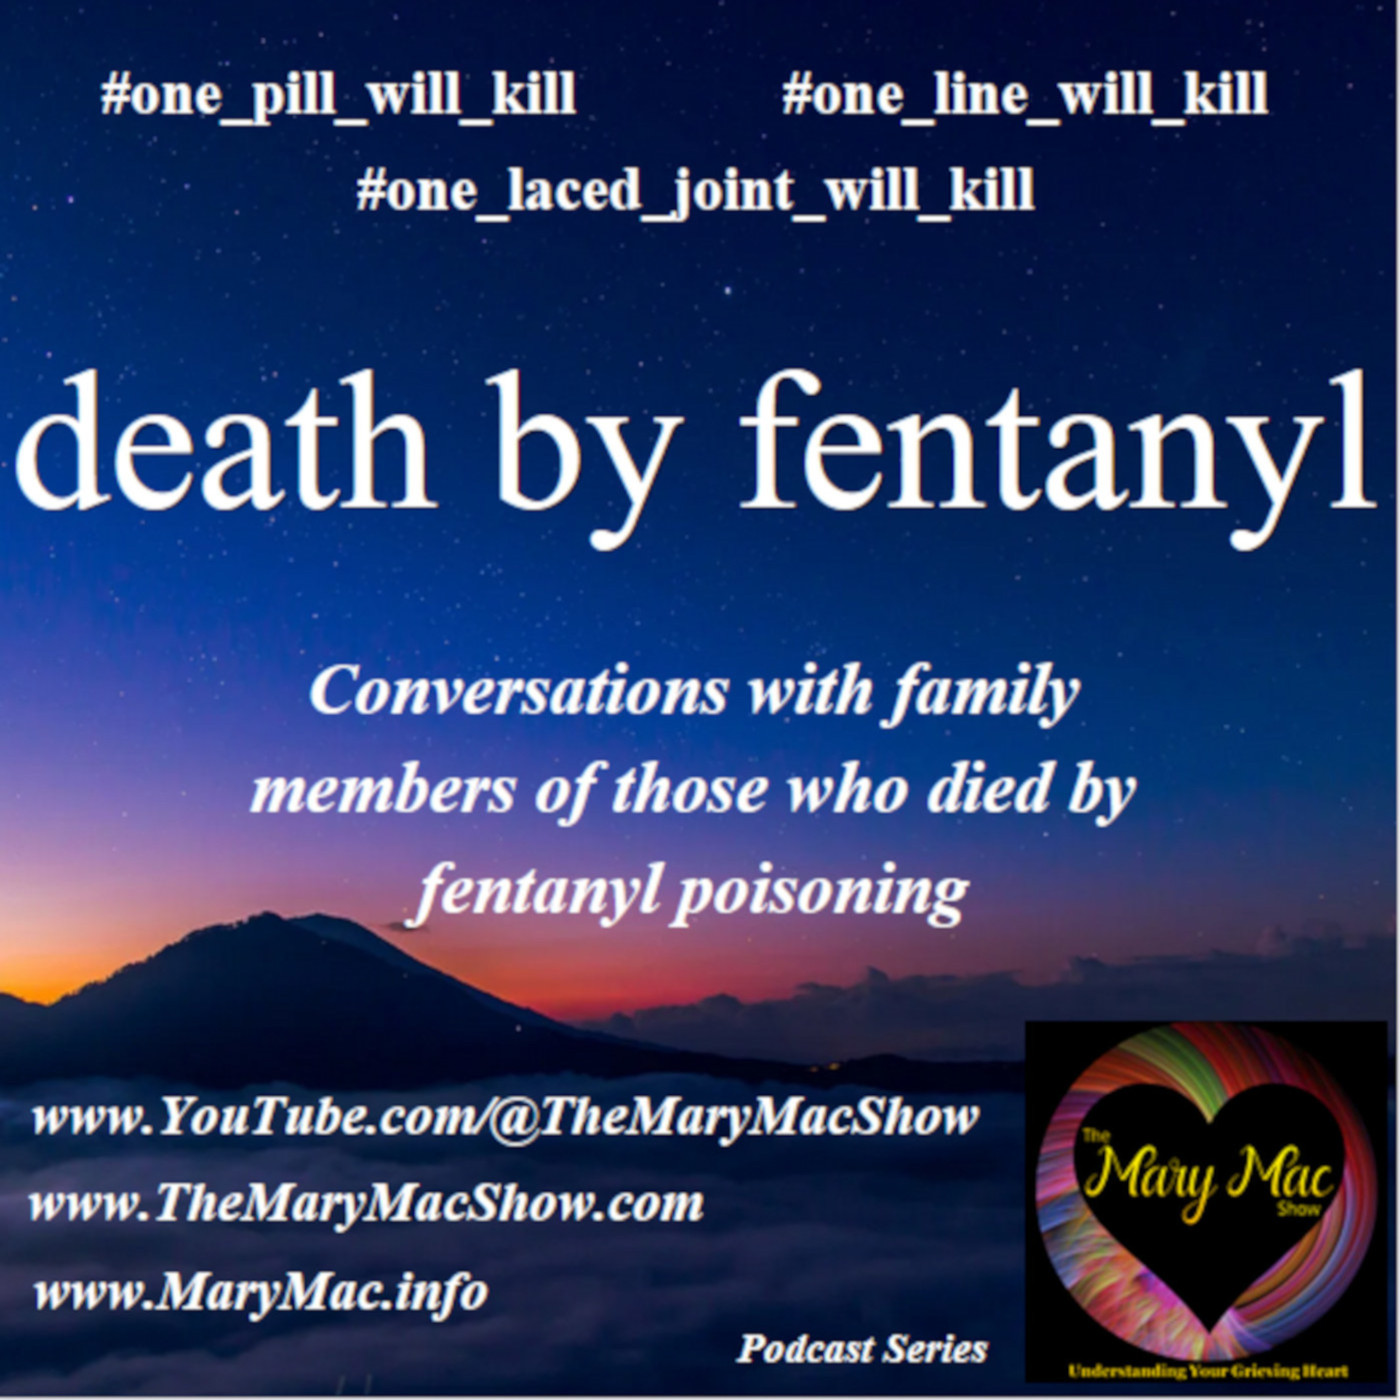 The Mary Mac Show | Death By Fentanyl Podcast Series